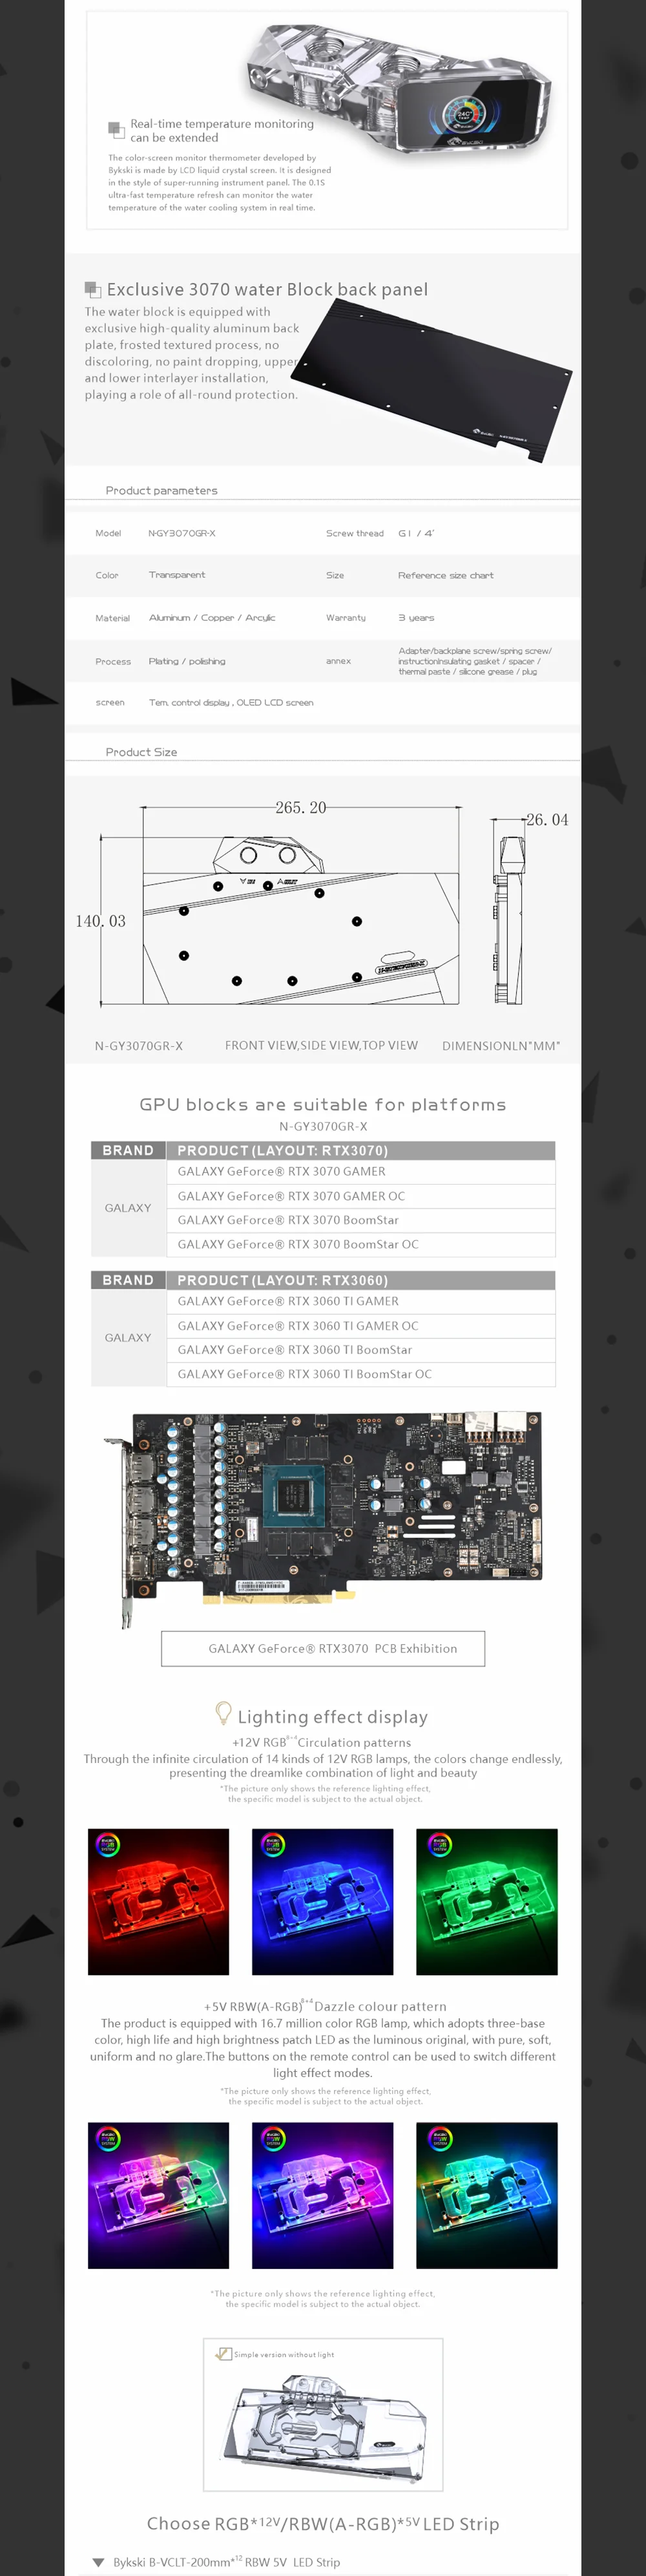 Bykski 3070 GPU Water Cooling Block For GALAX GeForce RTX 3070 GAMER, Graphics Card Liquid Cooler System, N-GY3070GR-X  